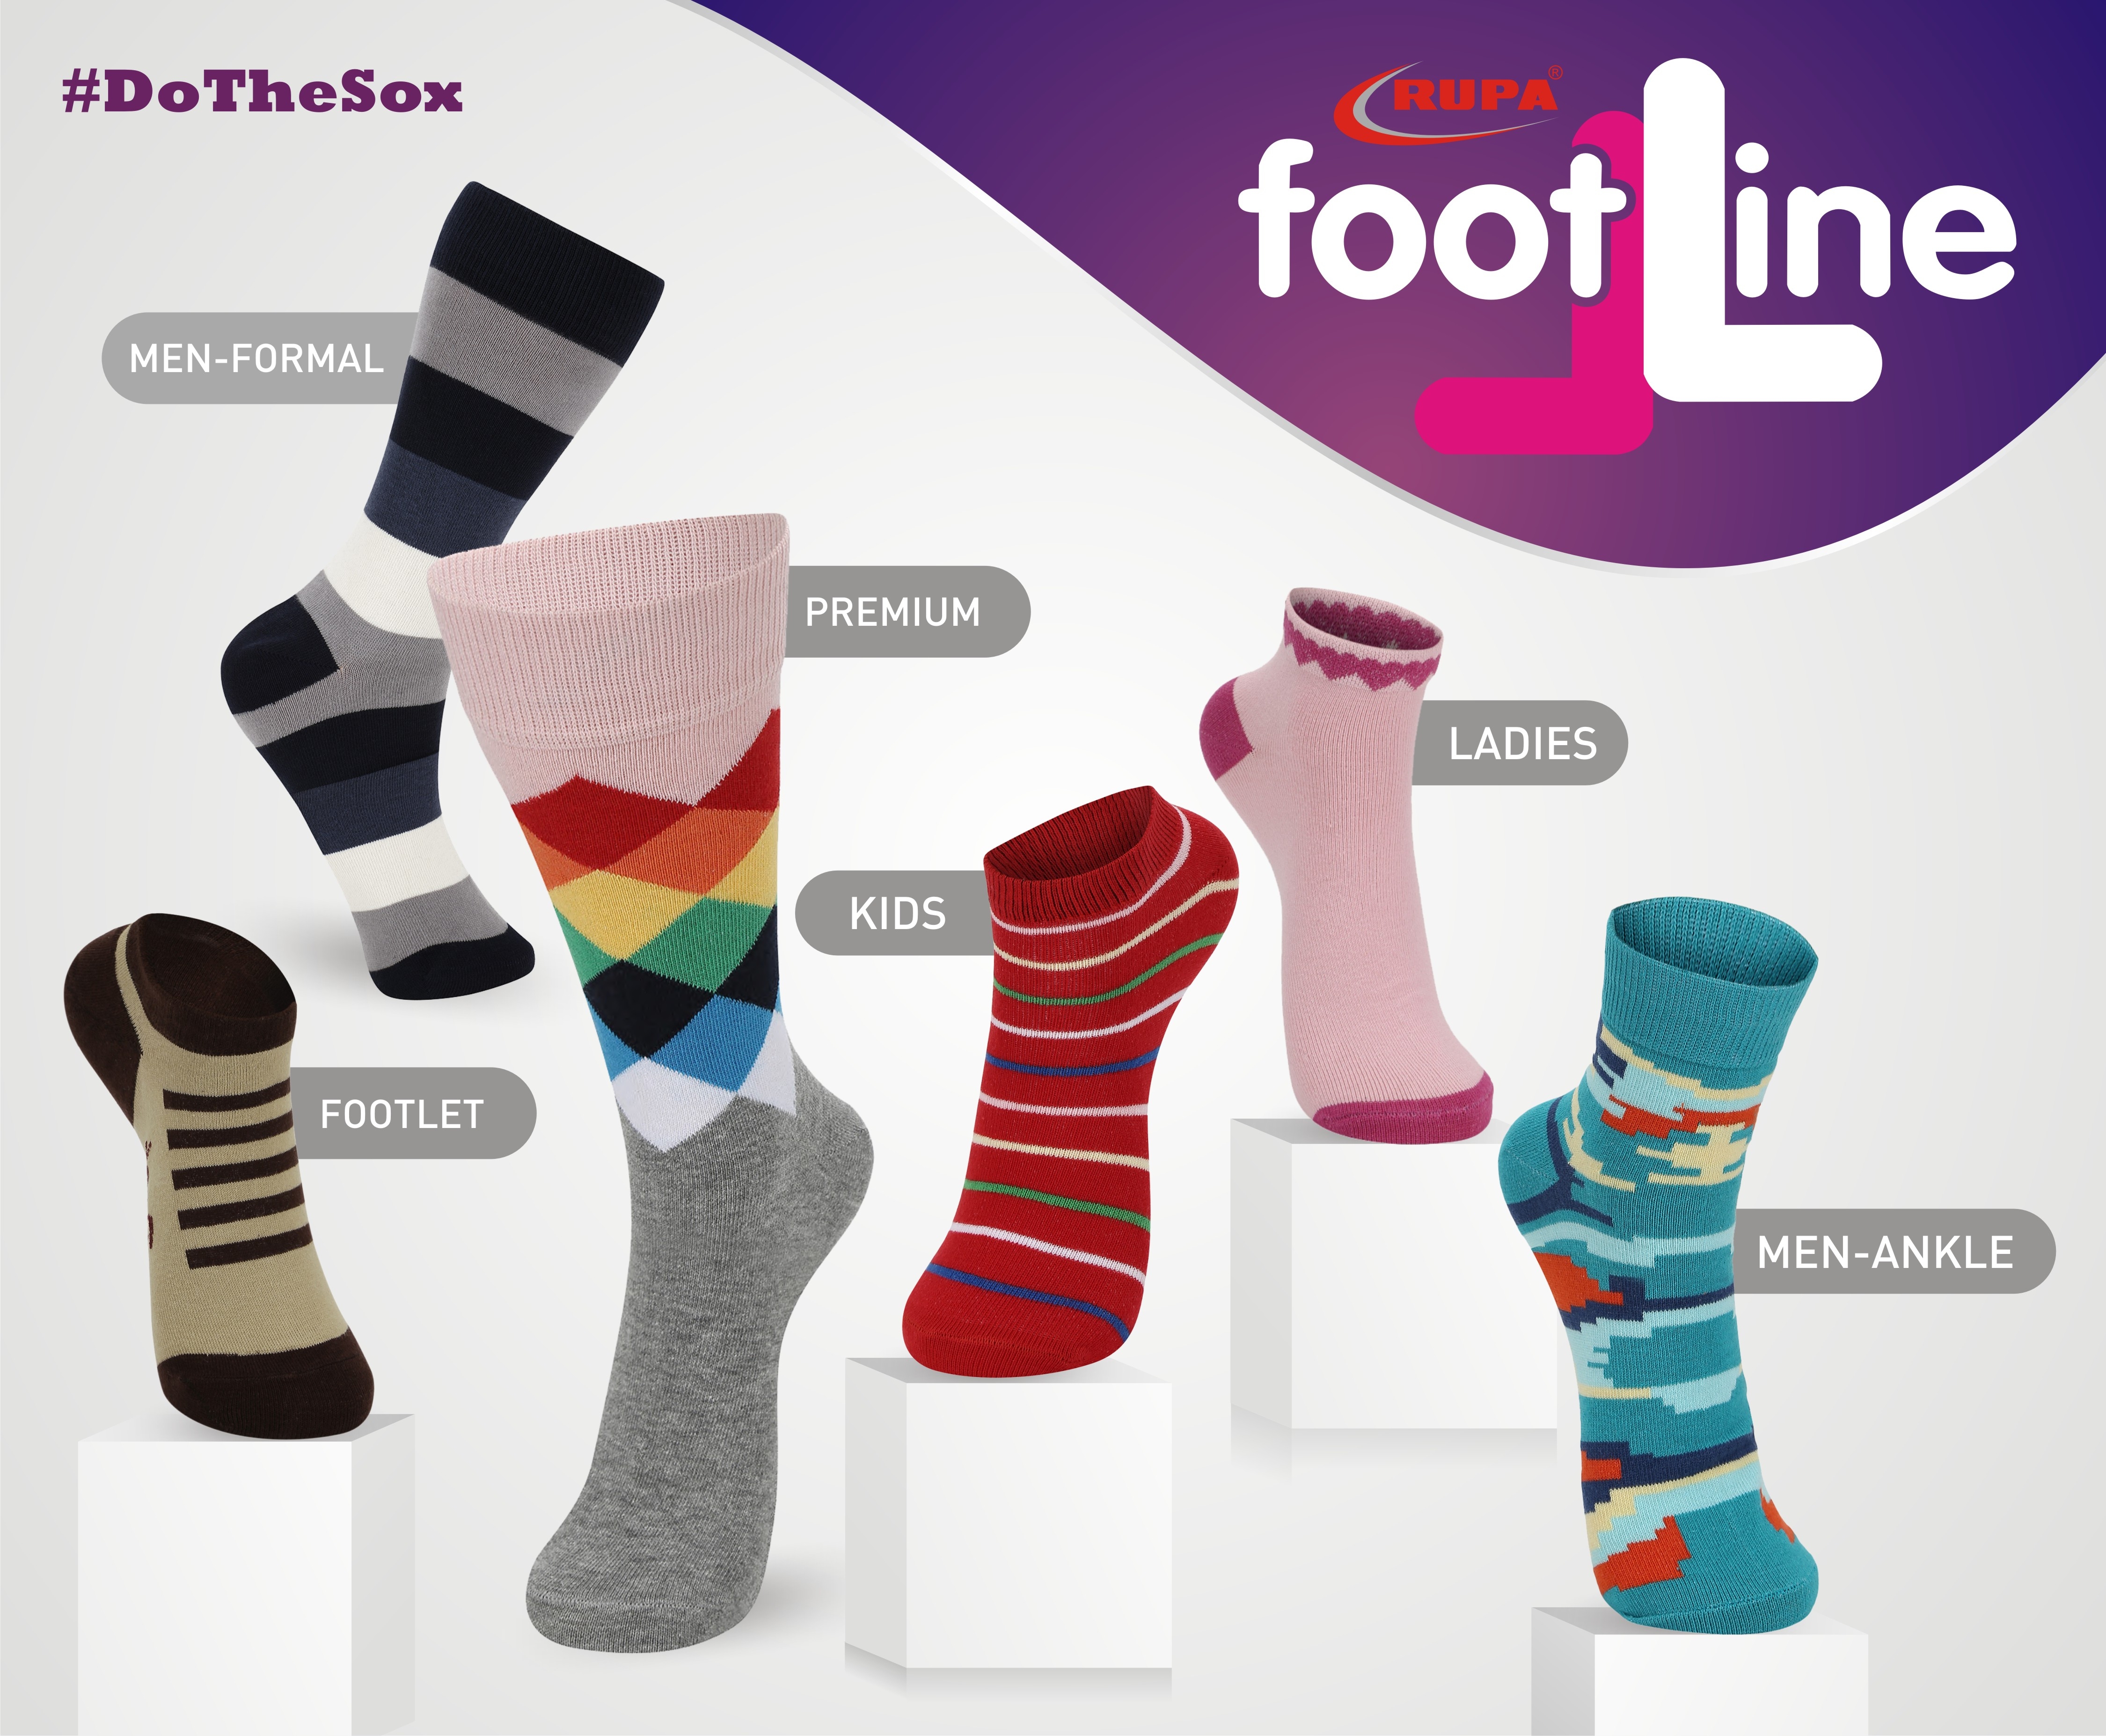 Rupa Footline launches a brand new collection of Designer Socks